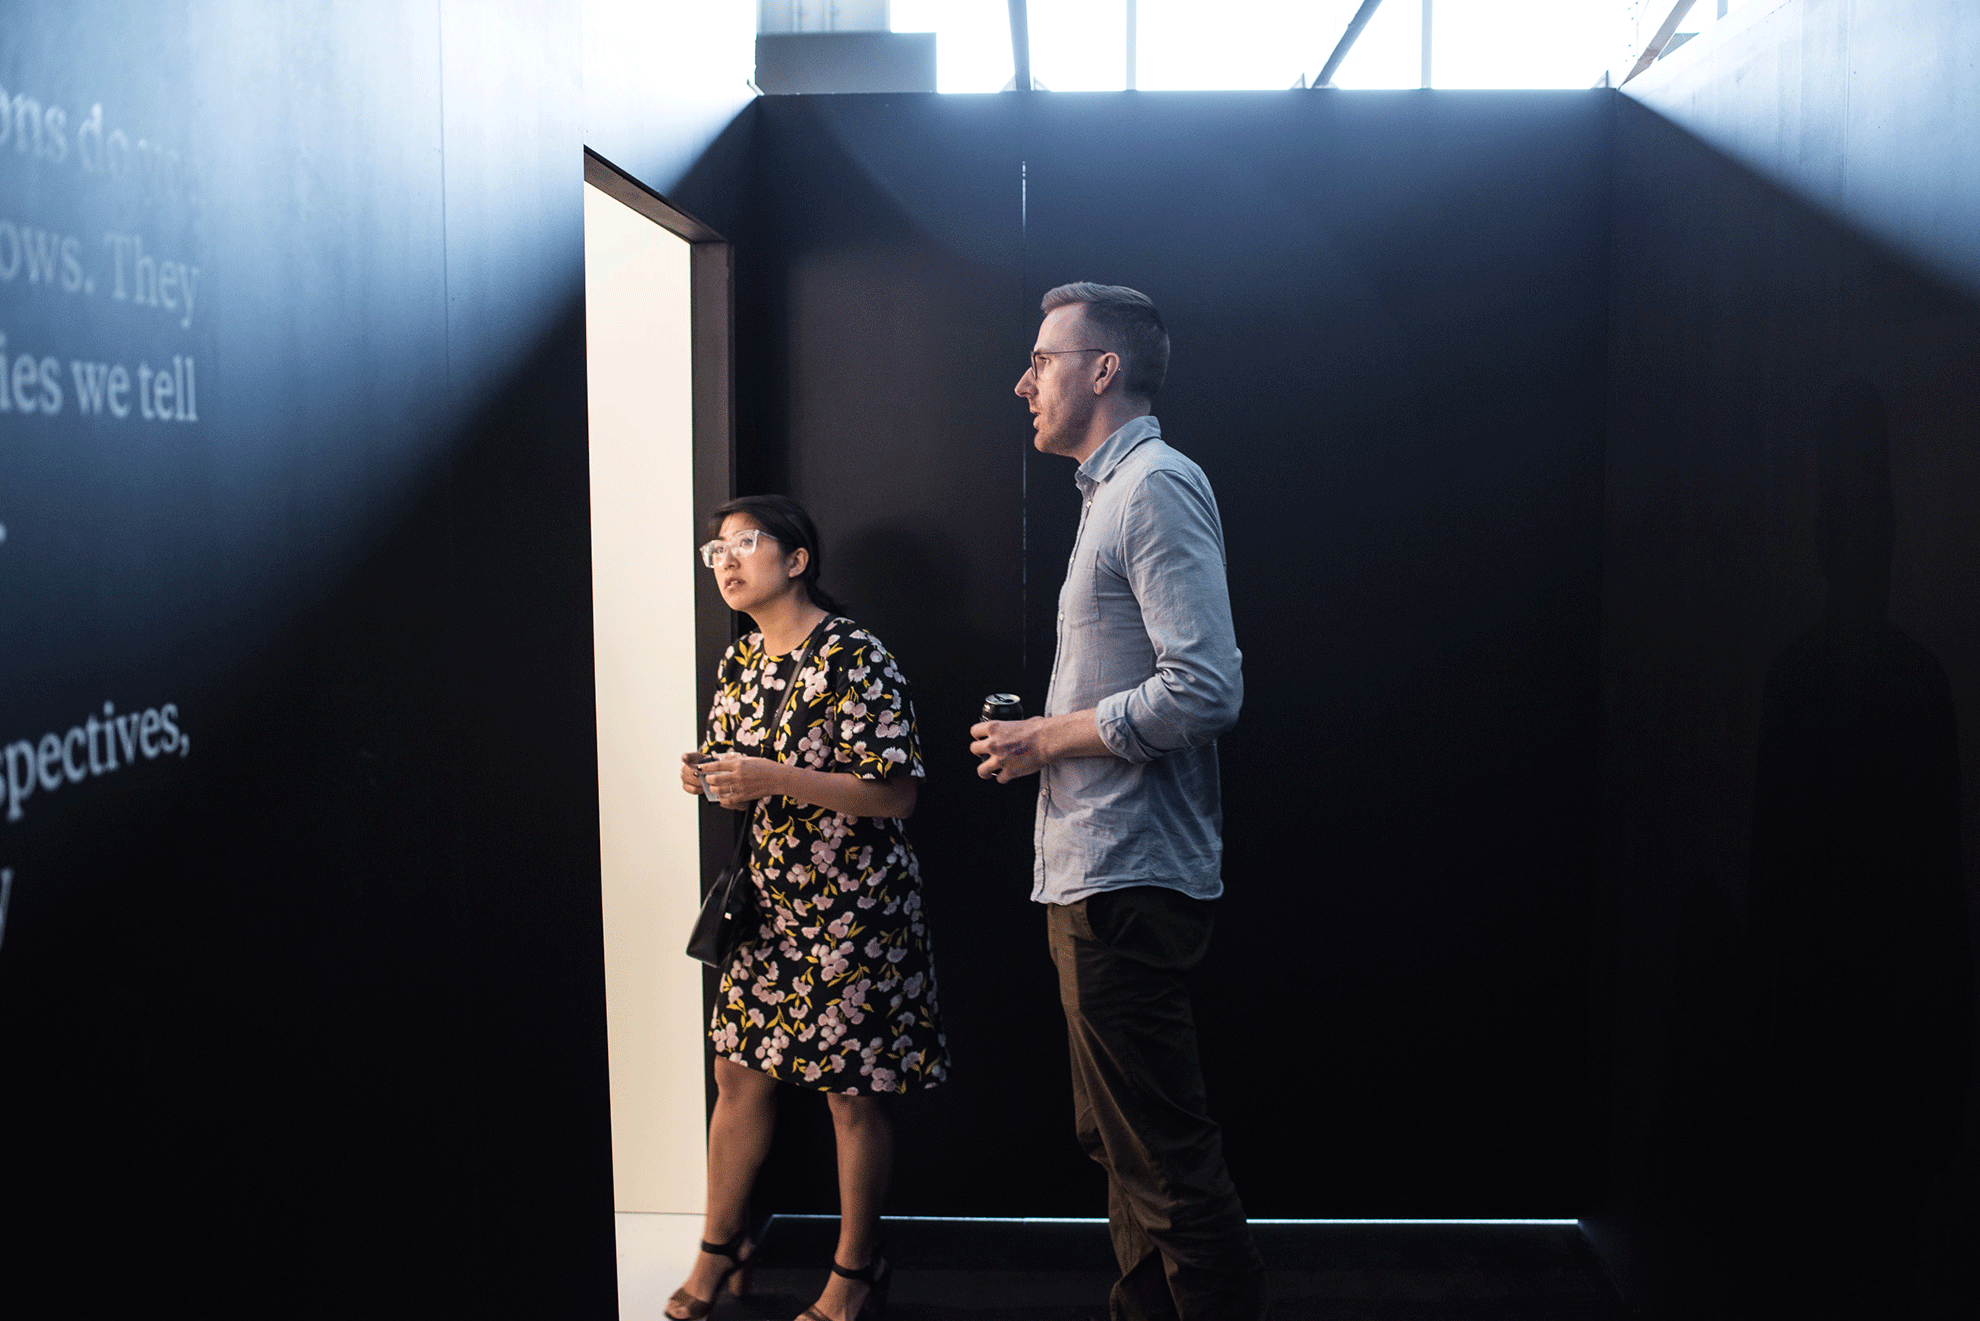 Two people exploring the installation.